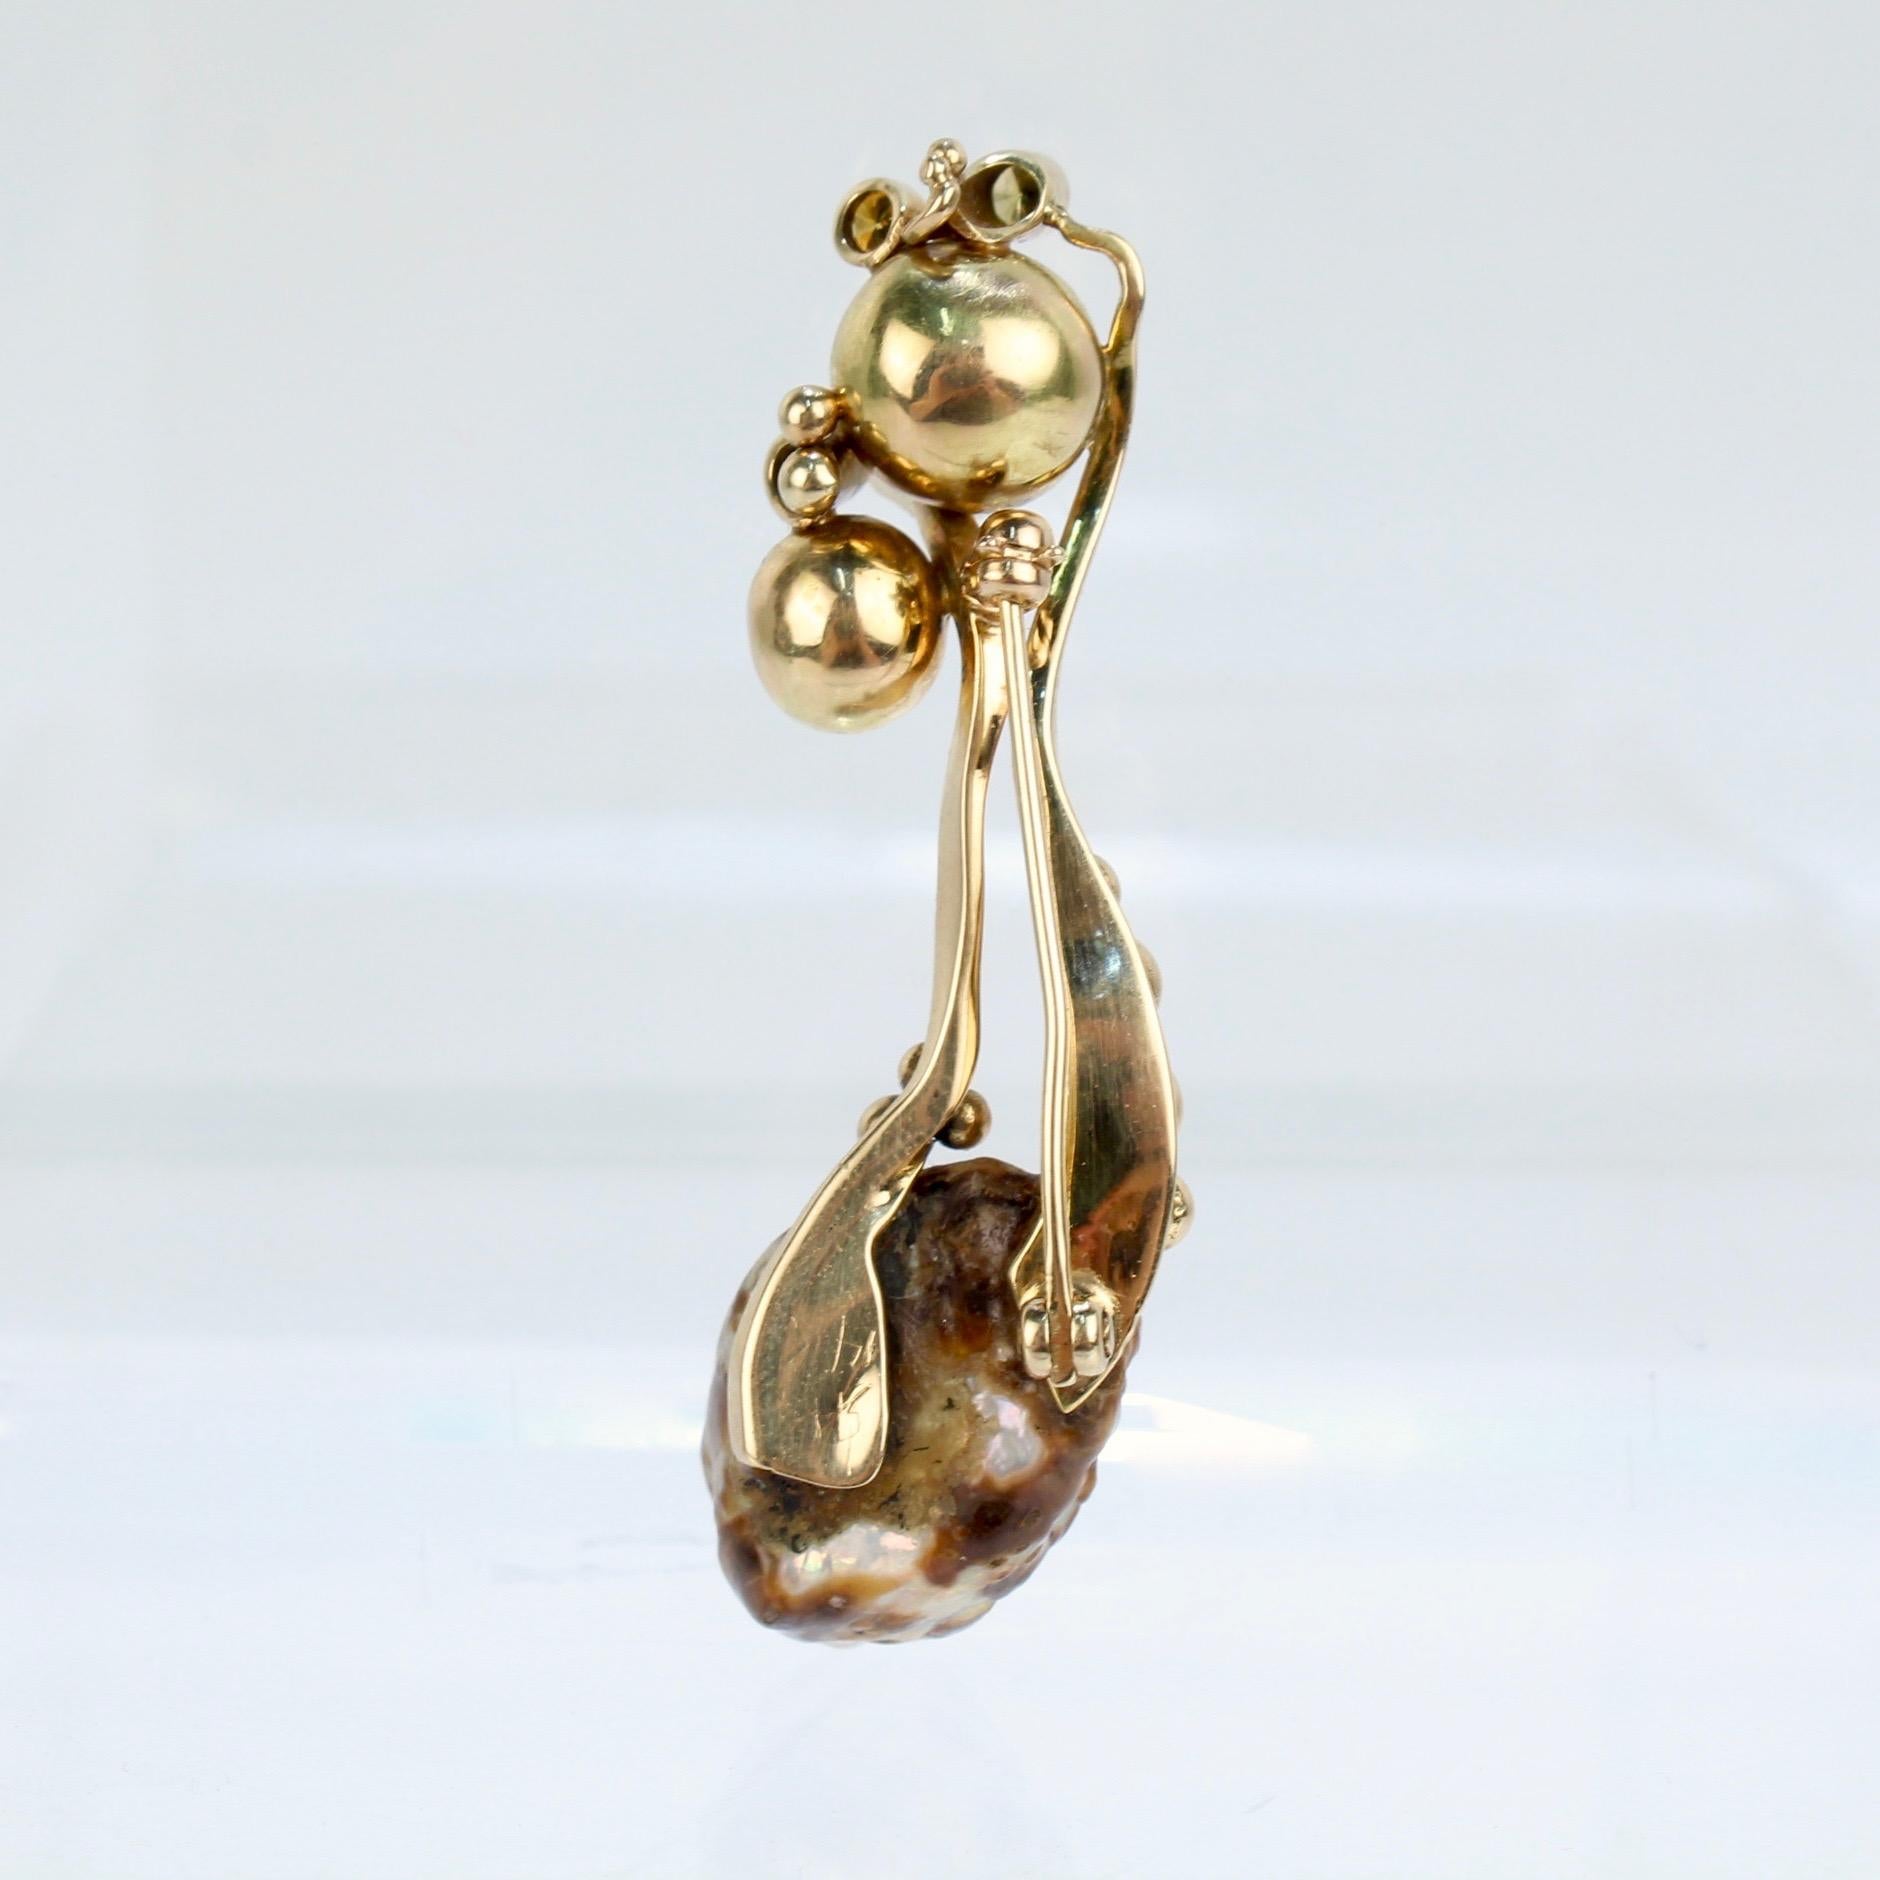 Modernist Biomorphic 14 Karat Gold Yellow Diamond & Baroque Pearl Brooch or Pin For Sale 2